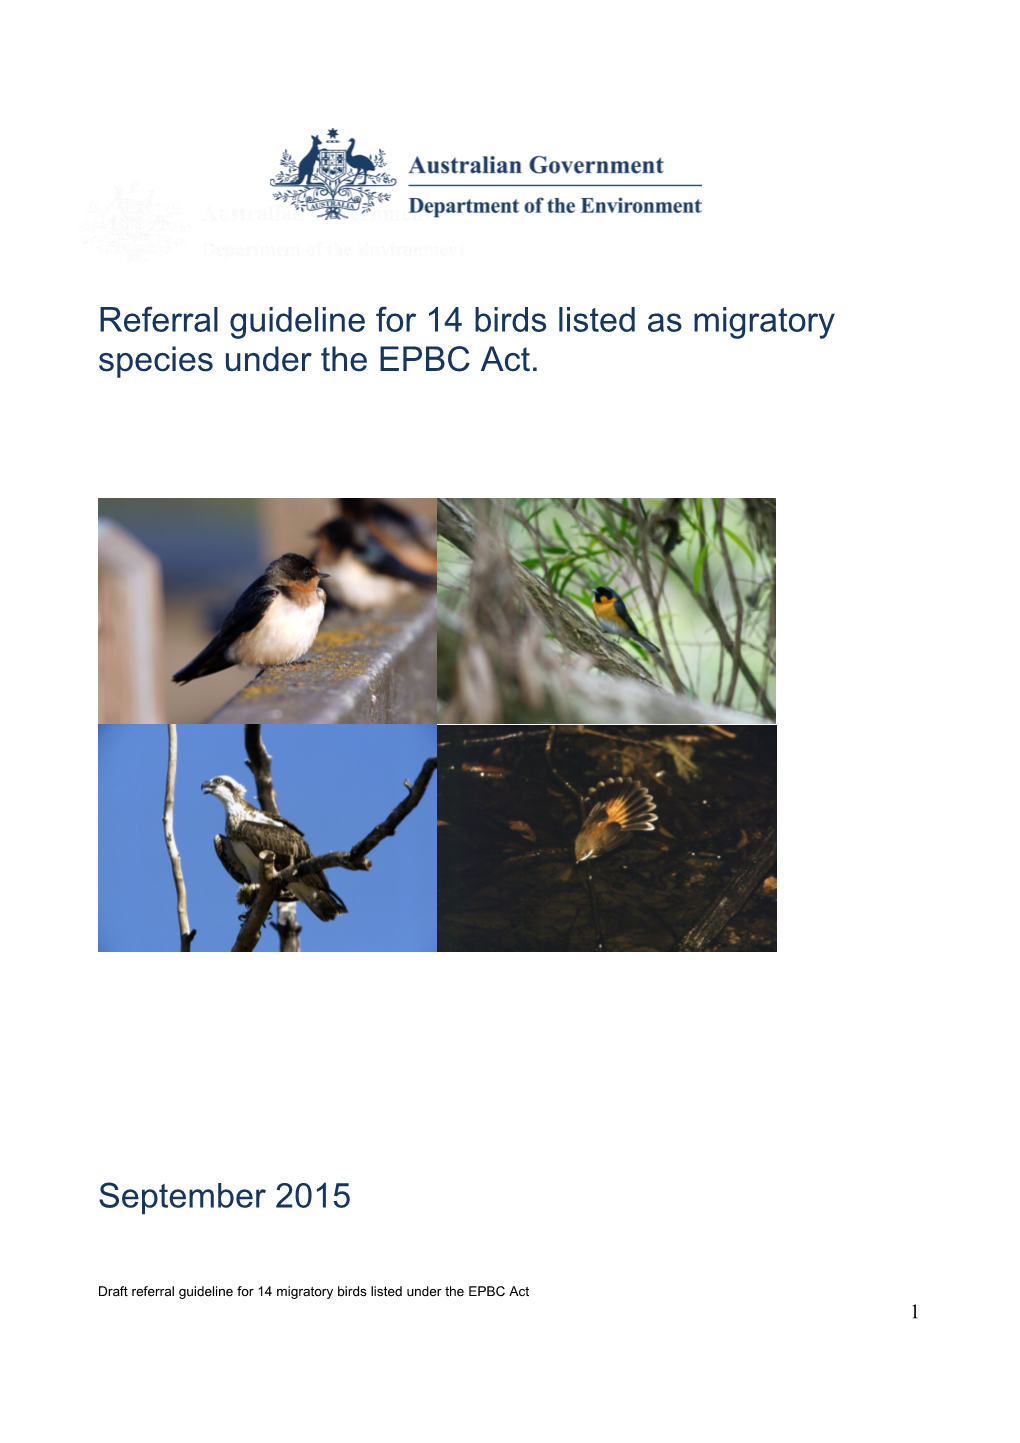 Referral Guideline for 14 Birds Listed As Migratory Species Under the EPBC Act